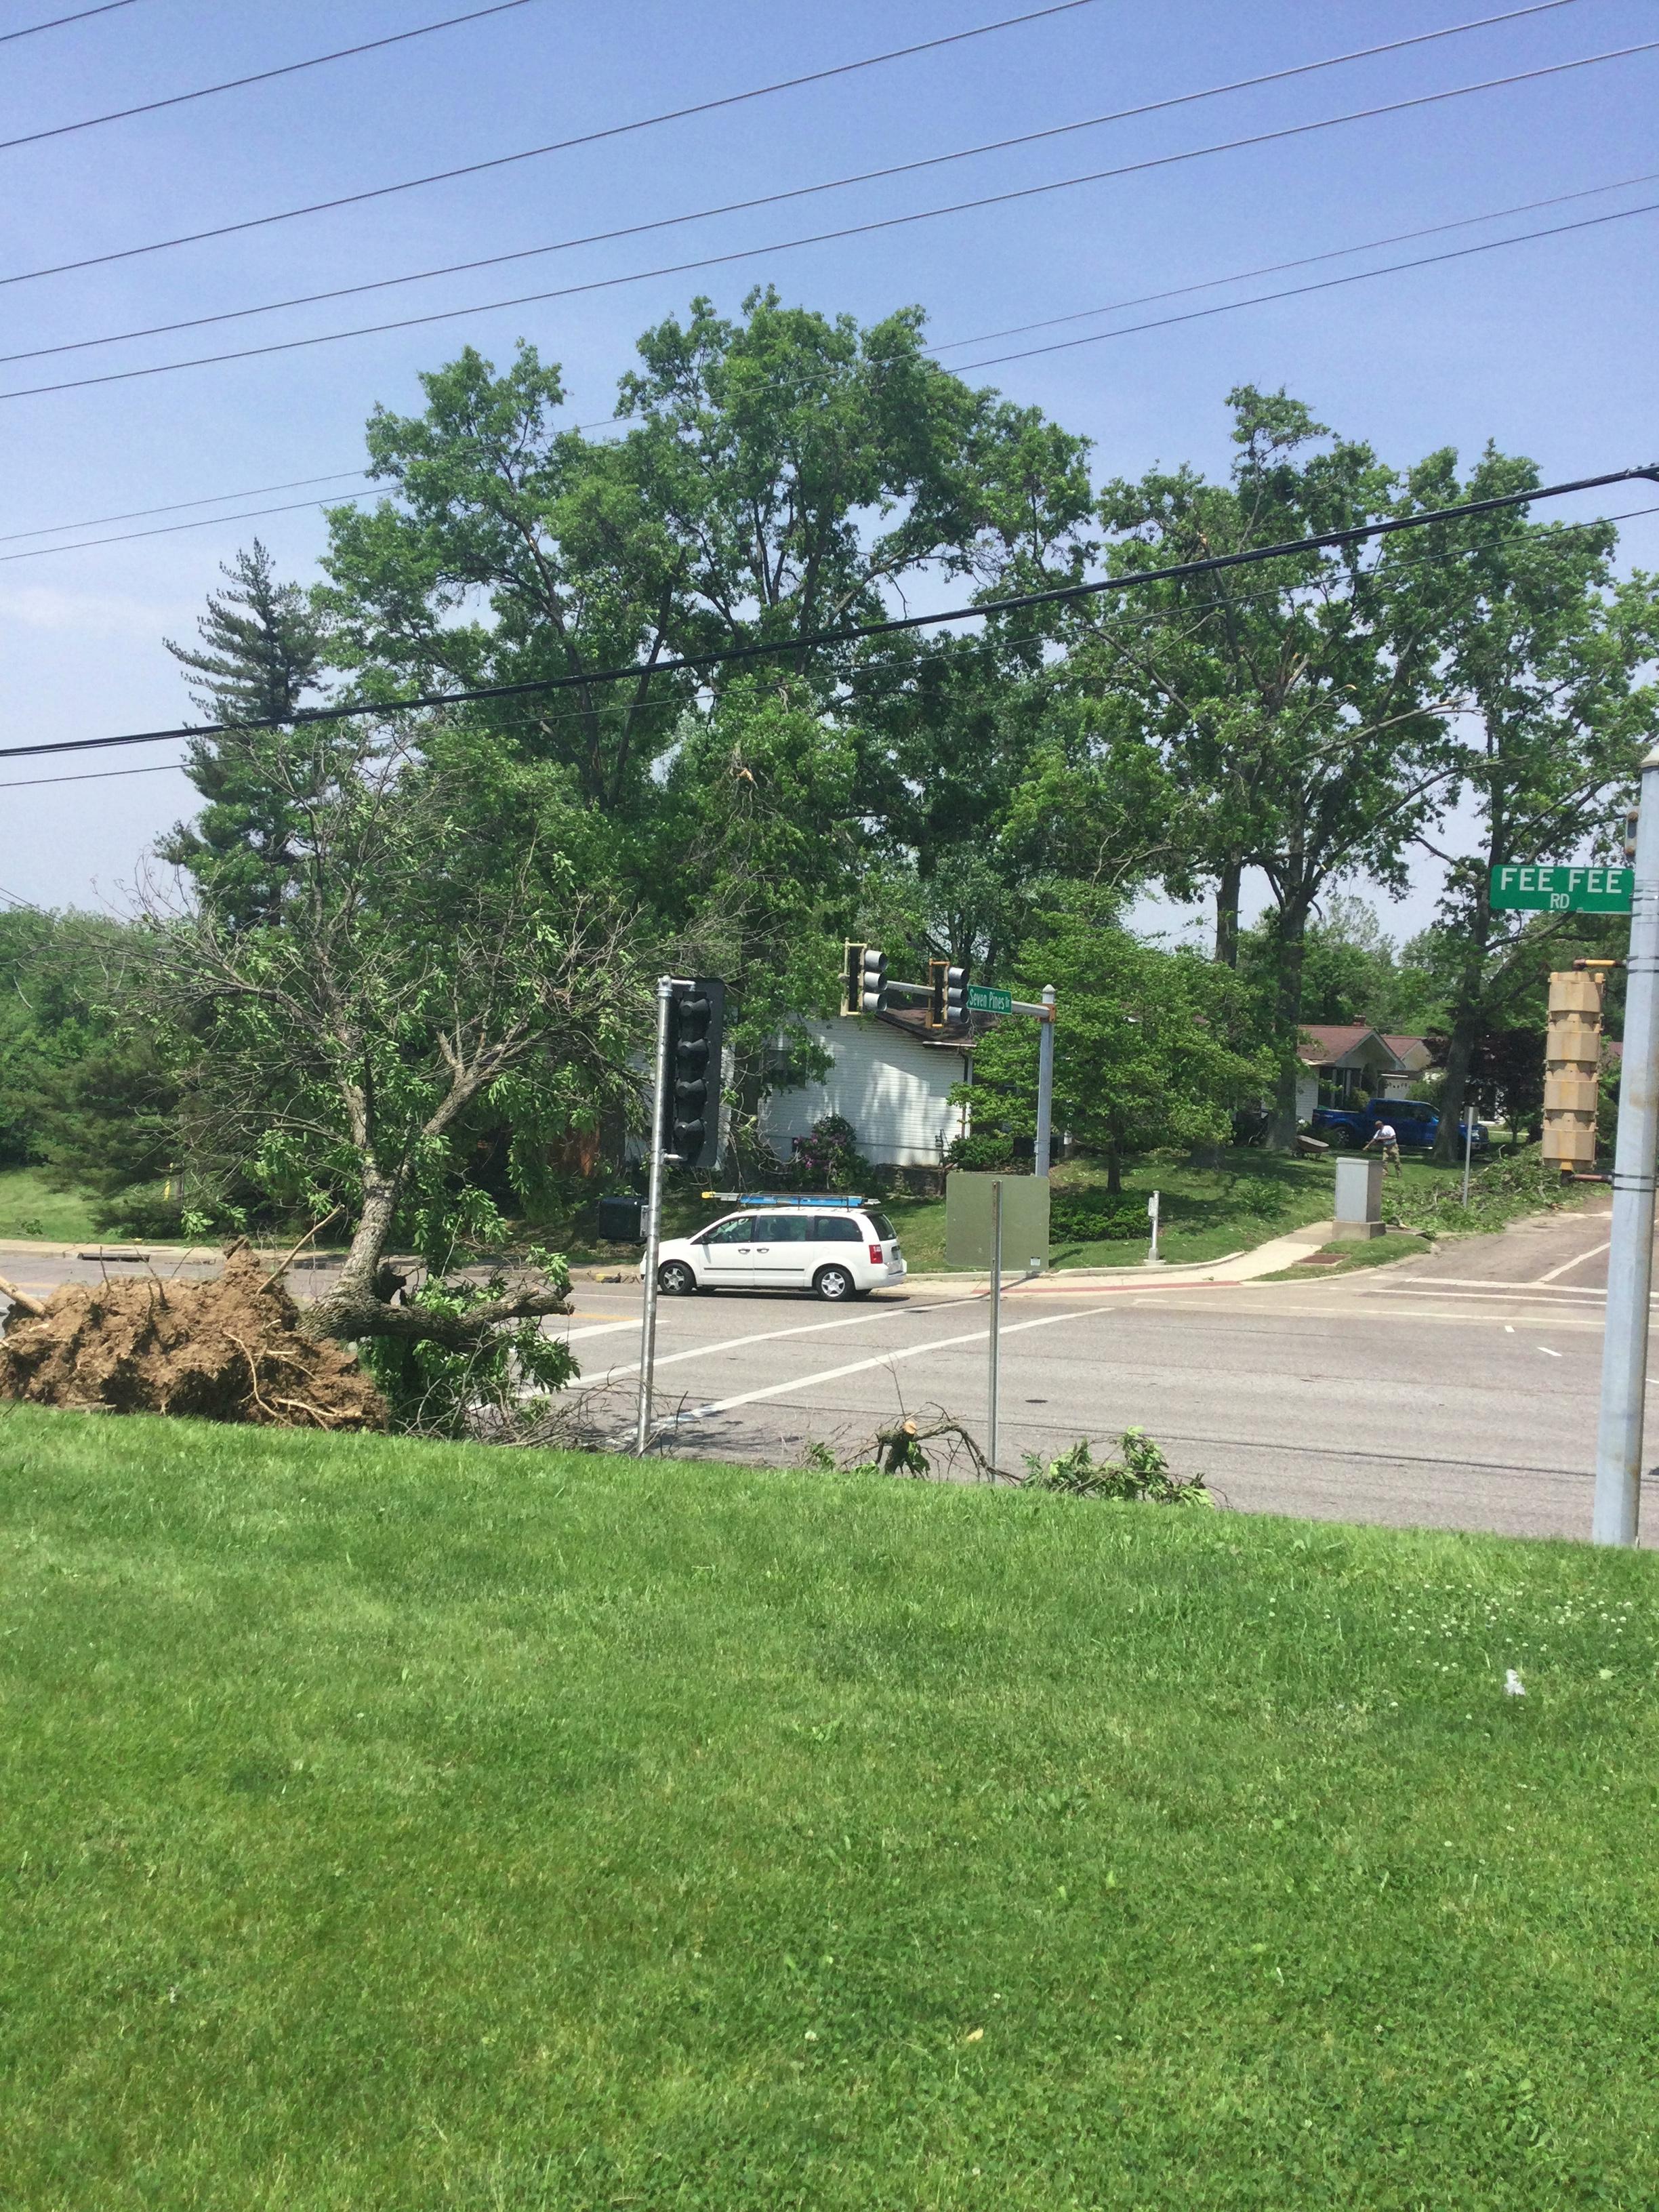 An uprooted tree at the intersection of Seven Pines Drive and Fee Fee Road.